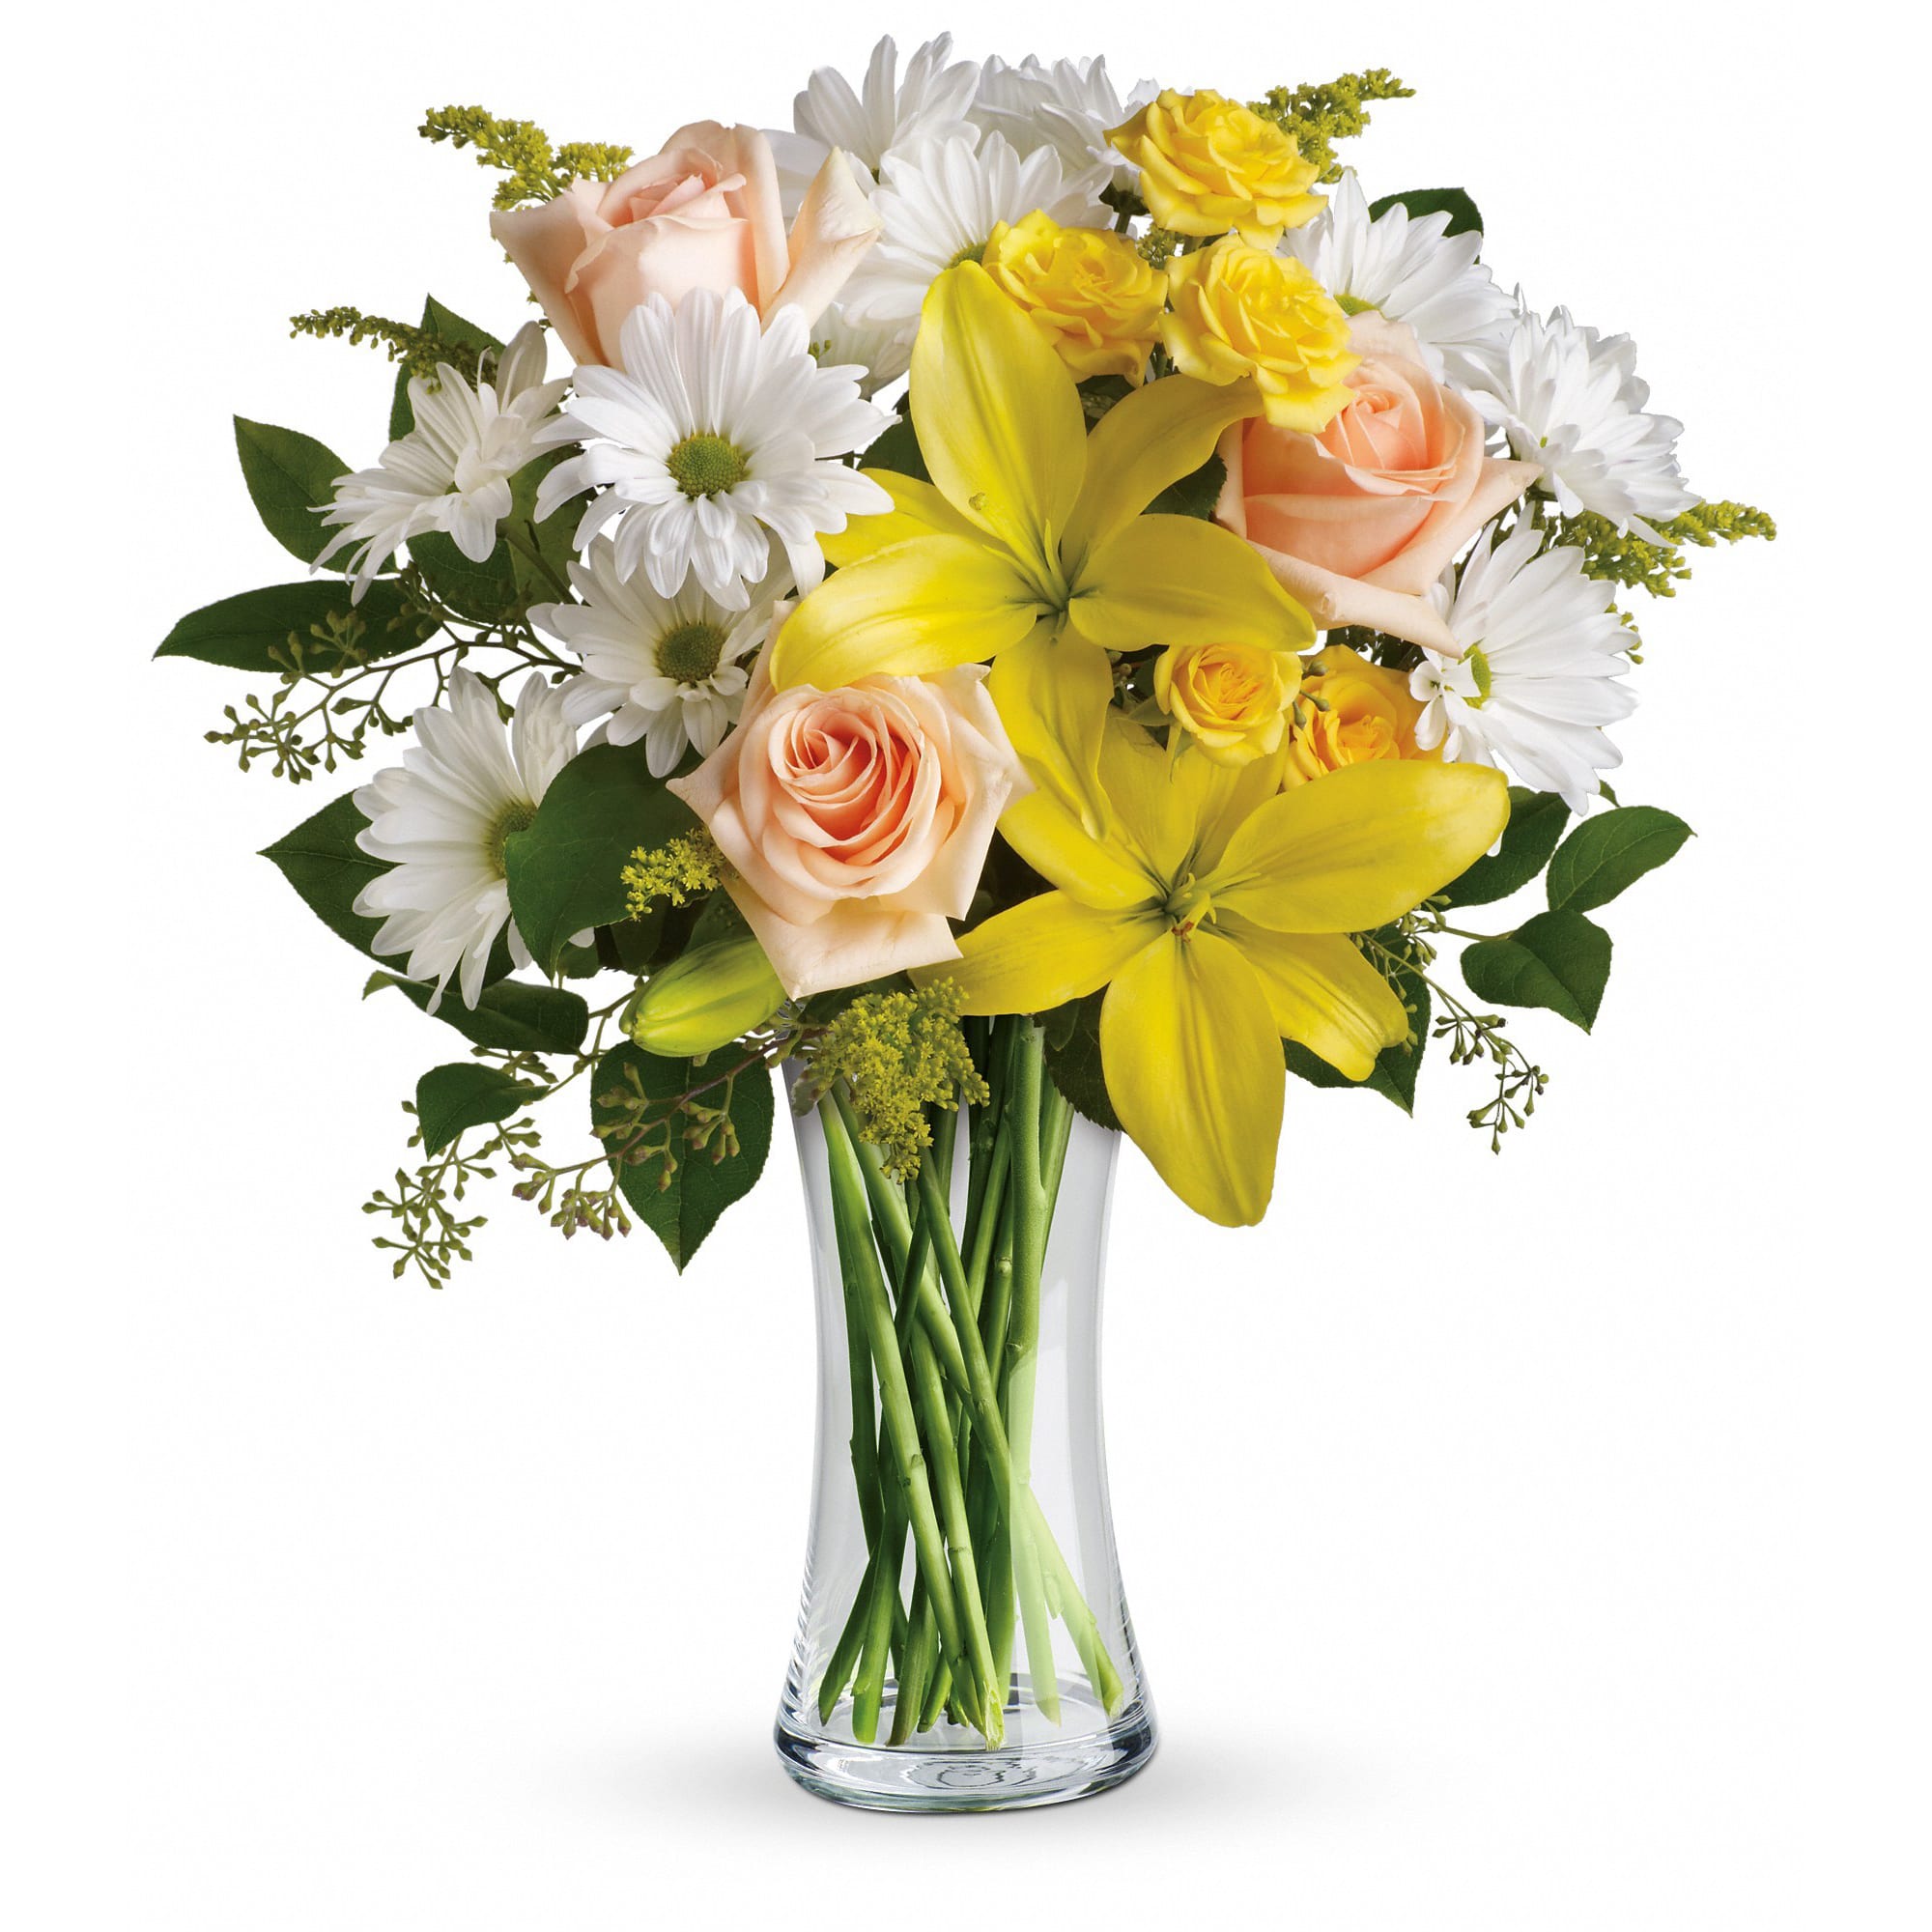 Teleflora's Daisies and Sunbeams - The song says, &quot;The sun'll come out tomorrow,&quot; but why not today? Whatever the weather, this sunny bouquet of yellow, peach and white flowers will brighten any day instantly. Perfect for a birthday, thank you or just because.